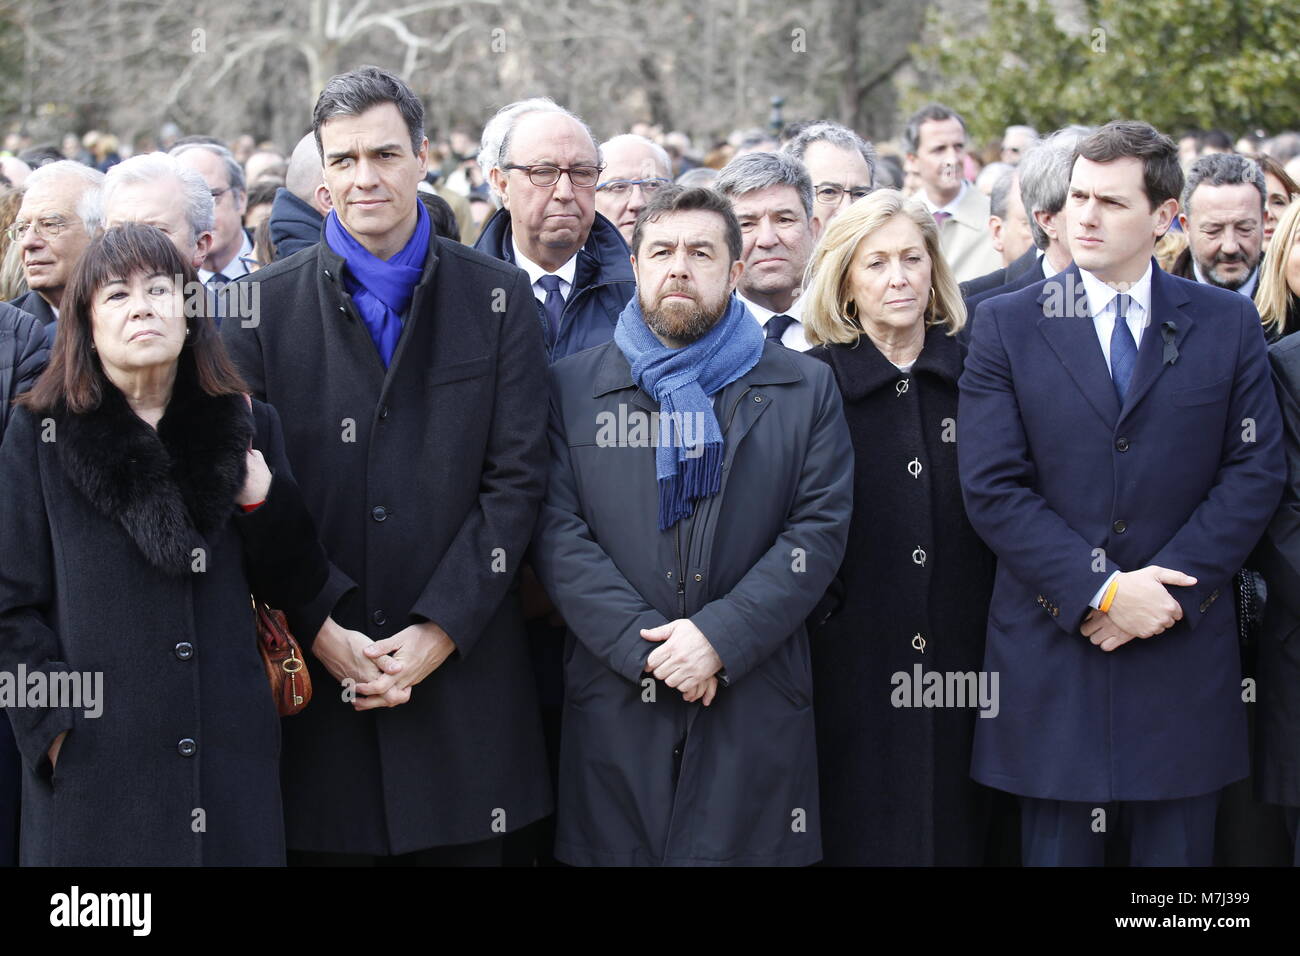 Madrid, Spain. 11th March, 2018.Politicans Pedro Sanchez and Albert Rivera during a tribute in memory of the victims of the attack of 11-M 2004, at the forest of the Retiro Park on Sunday 11 March 2018. Credit: Gtres Información más Comuniación on line, S.L./Alamy Live News Stock Photo